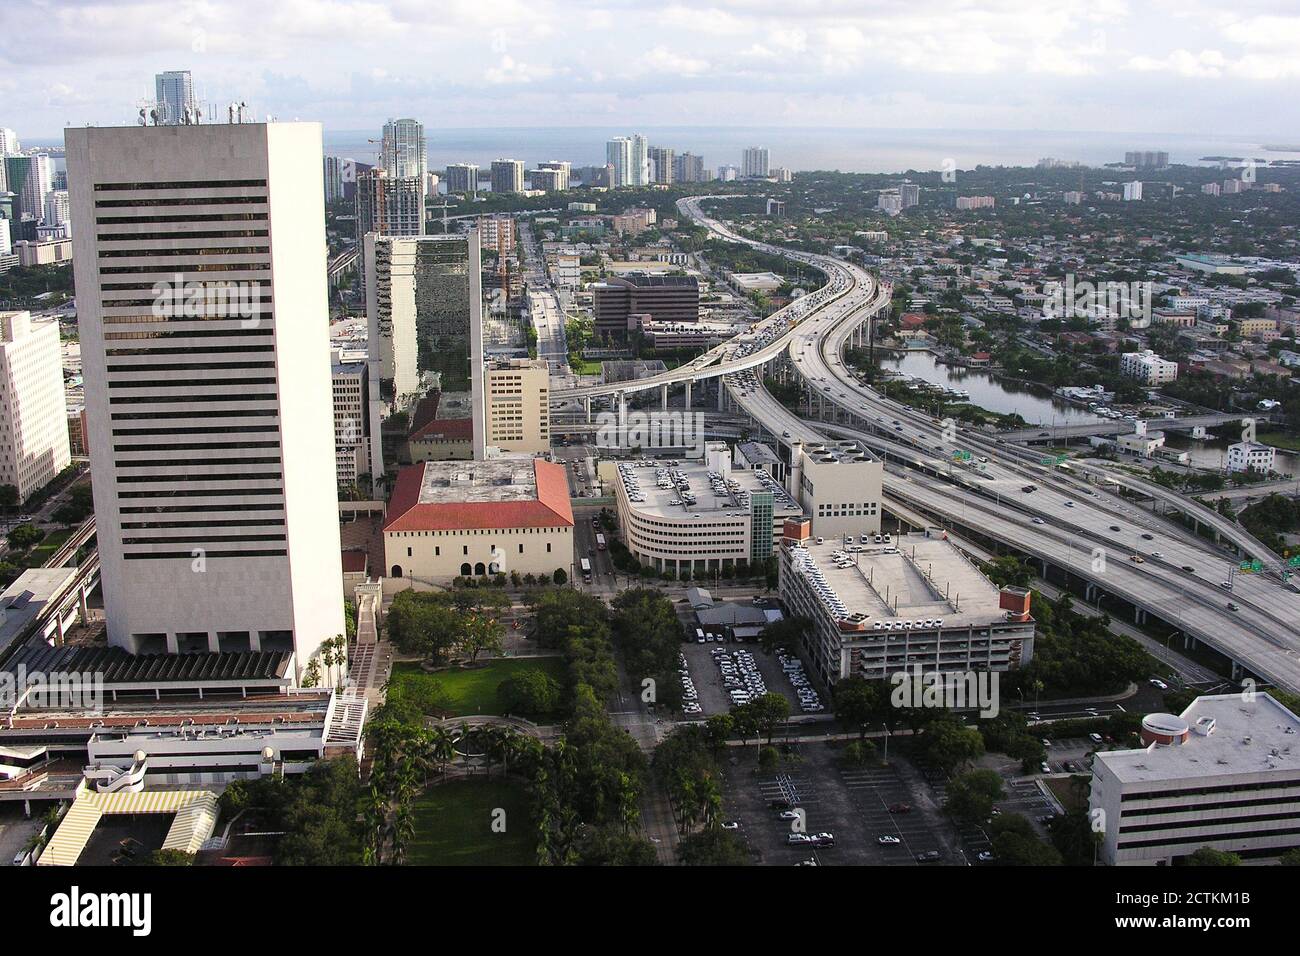 Archival September 2005 aerial view of buildings along the Interstate 95 freeway near downtown Miami, Florida, USA. Stock Photo